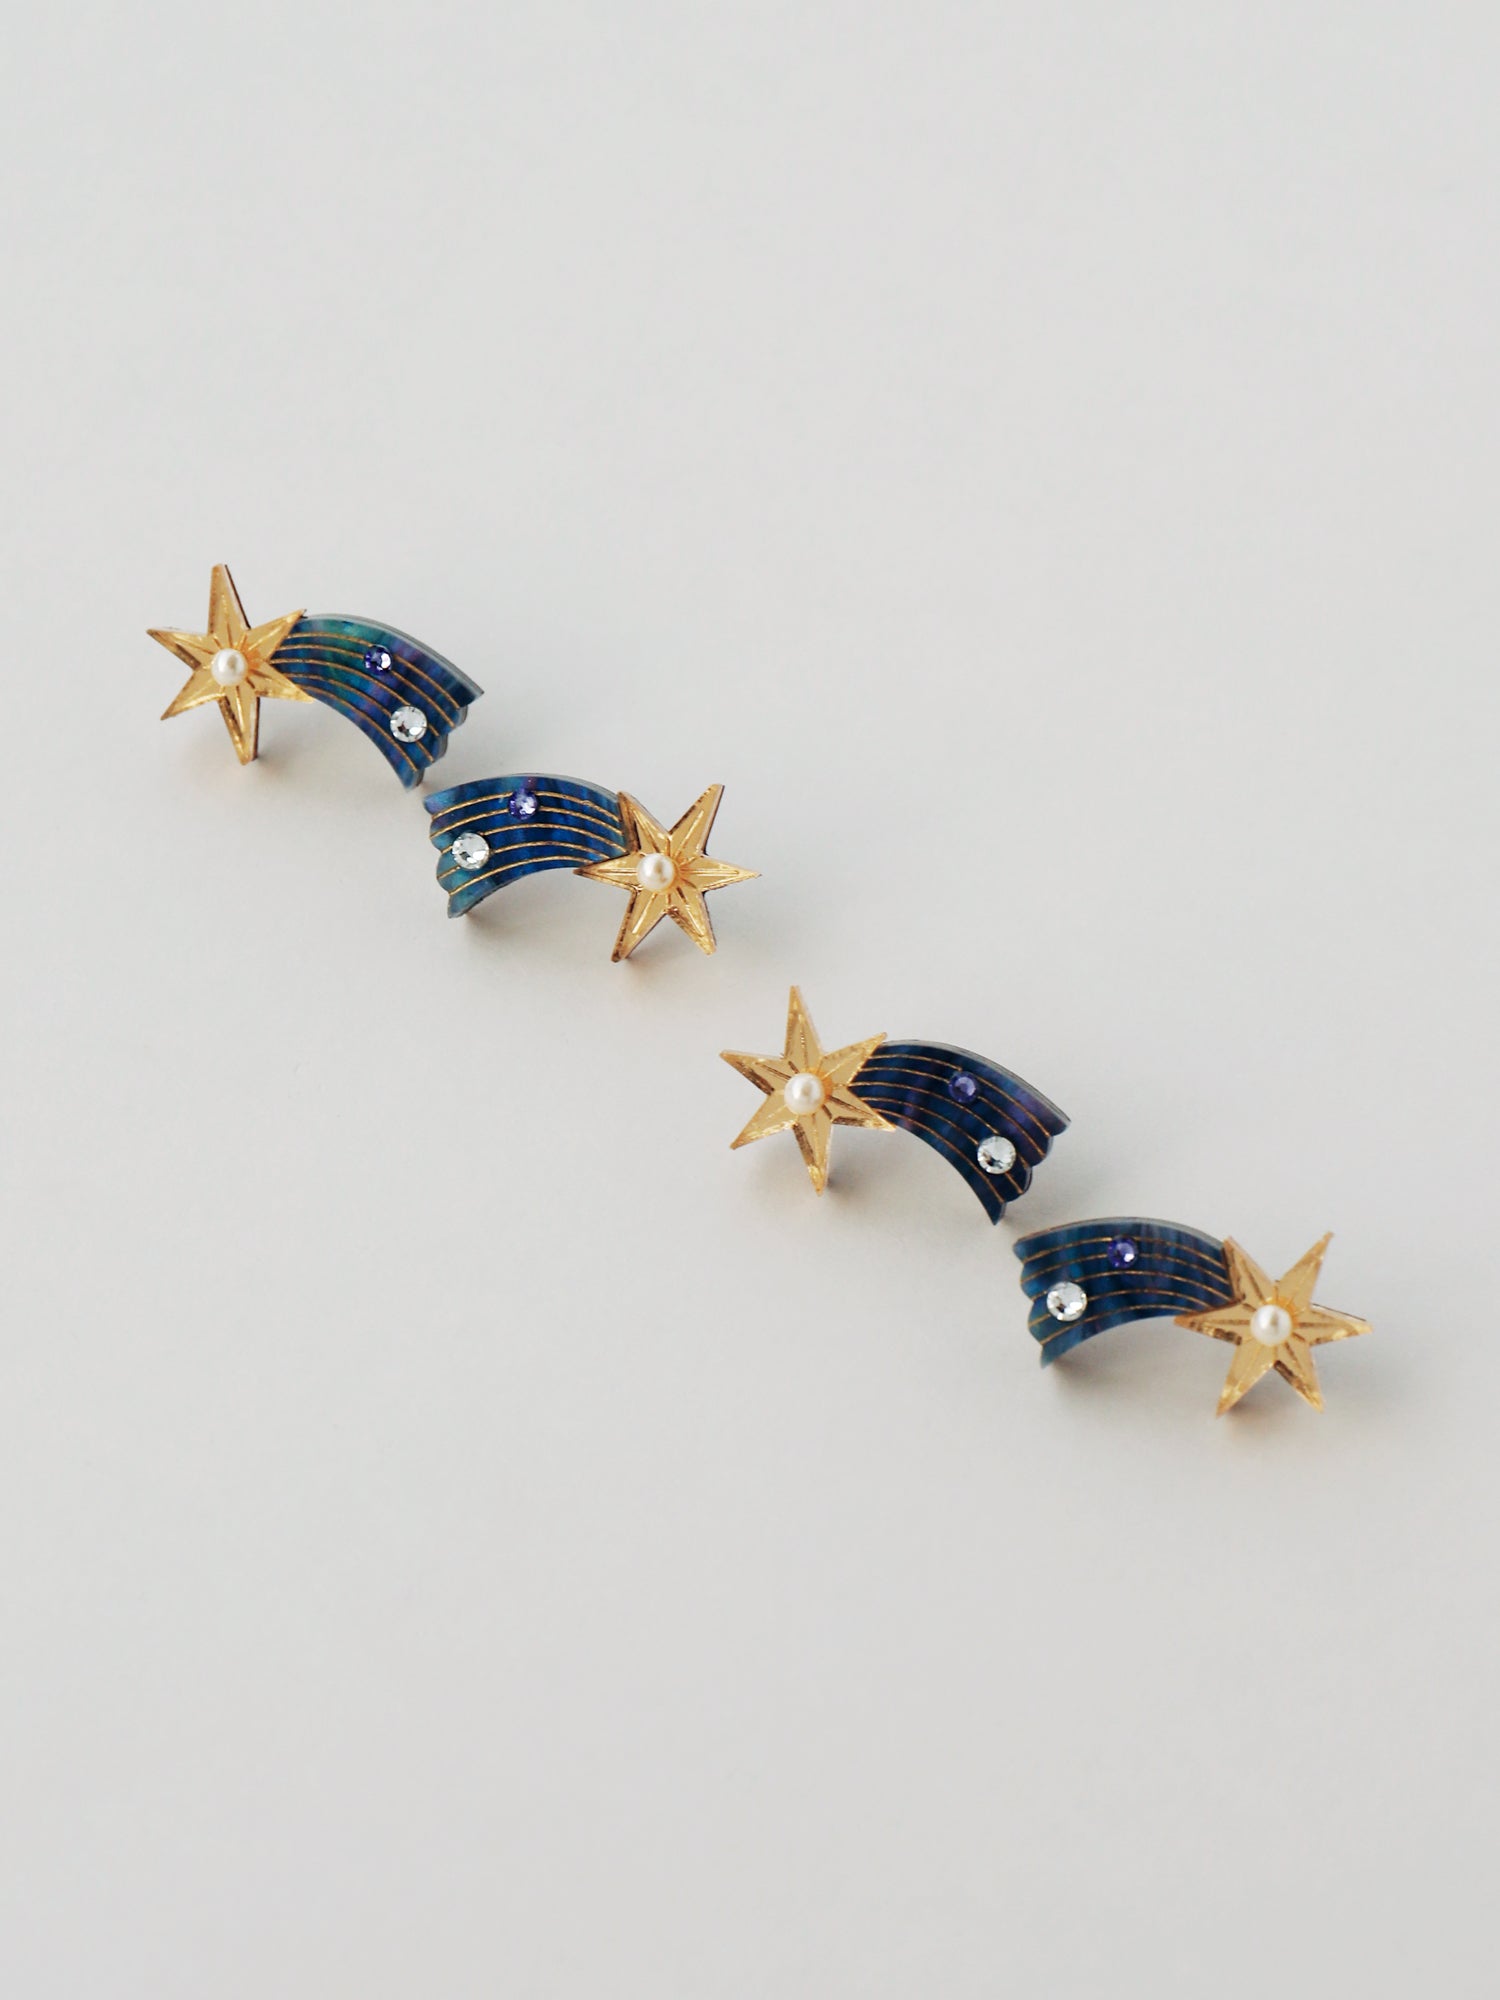 Shooting Star stud earrings made with laser cut deep blue acrylic, Czech glass pearls and hand inked details. Handmade in the UK by Wolf & Moon.